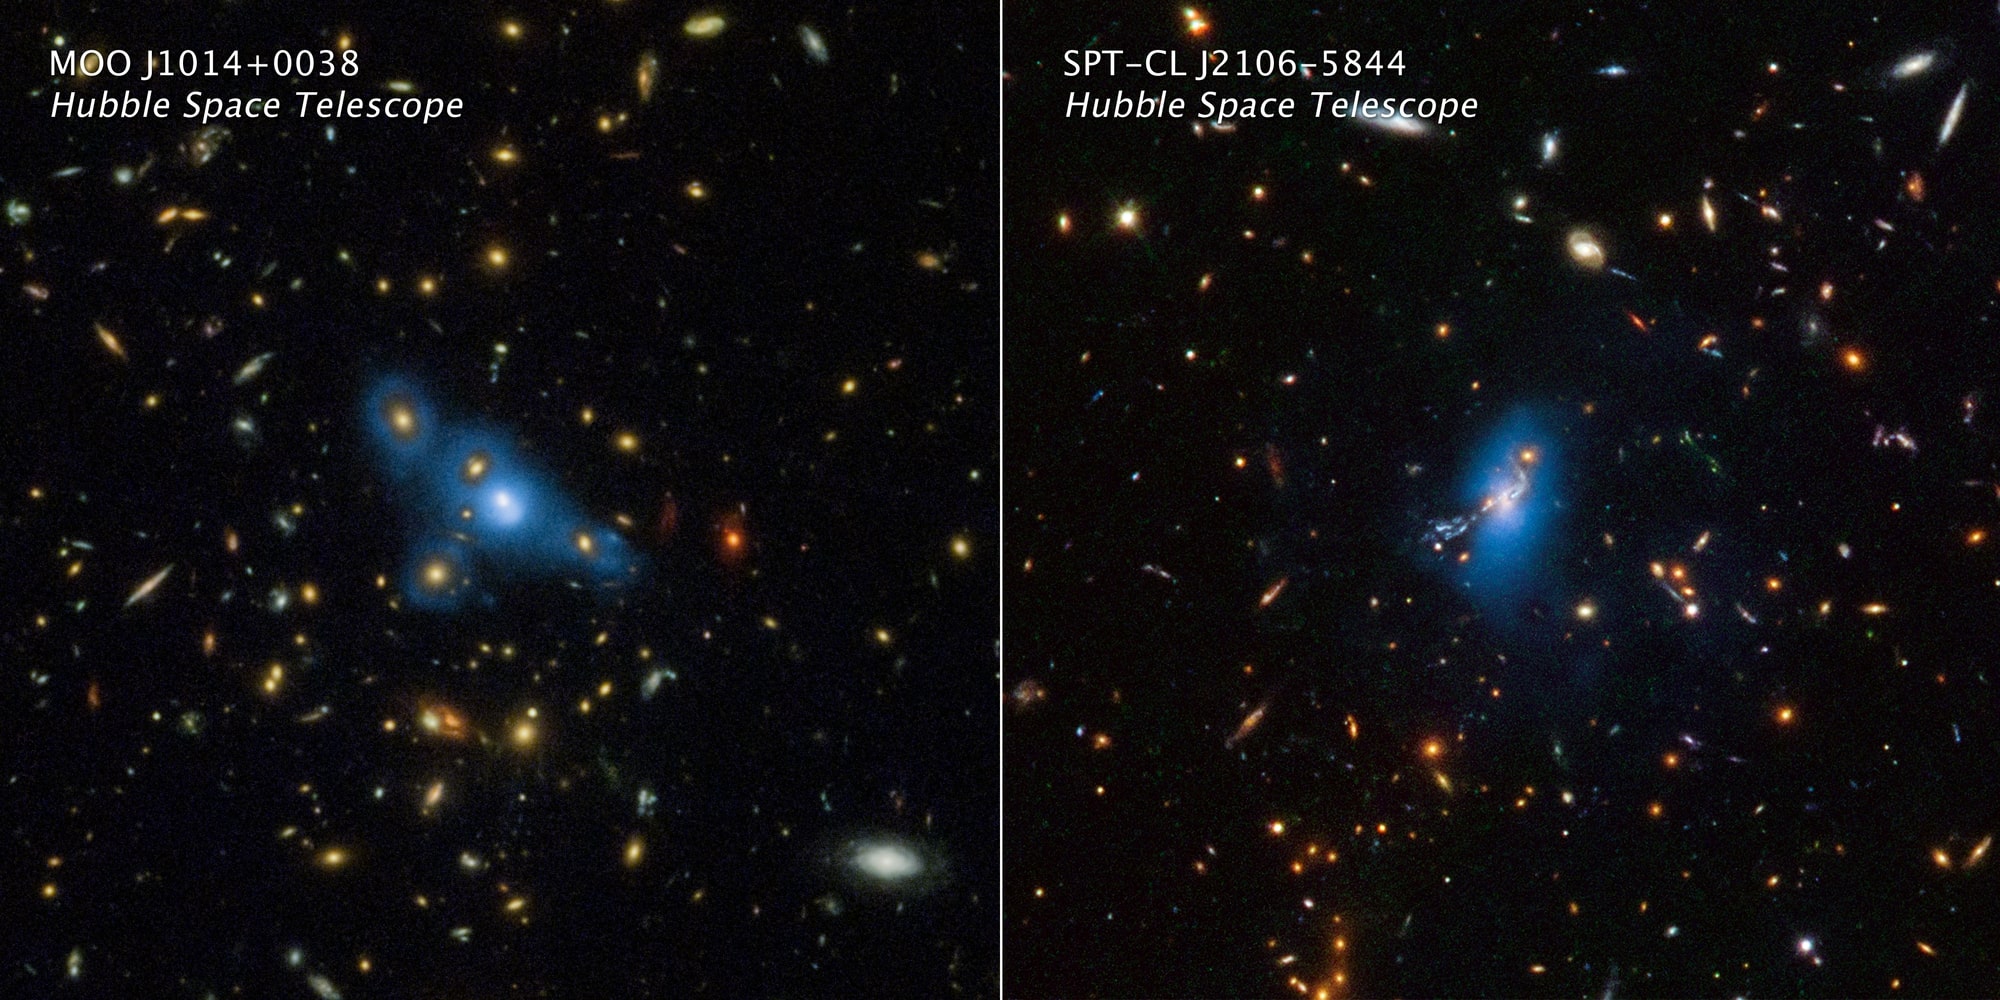 These are Hubble Space Telescope images of two massive clusters of galaxies named MOO J1014+0038 (left panel) and SPT-CL J2106-5844 (right panel). The artificially added blue color is translated from Hubble data that captured a phenomenon called intracluster light. This extremely faint glow traces a smooth distribution of light from wandering stars scattered across the cluster. Billions of years ago the stars were shed from their parent galaxies and now drift through intergalactic space.